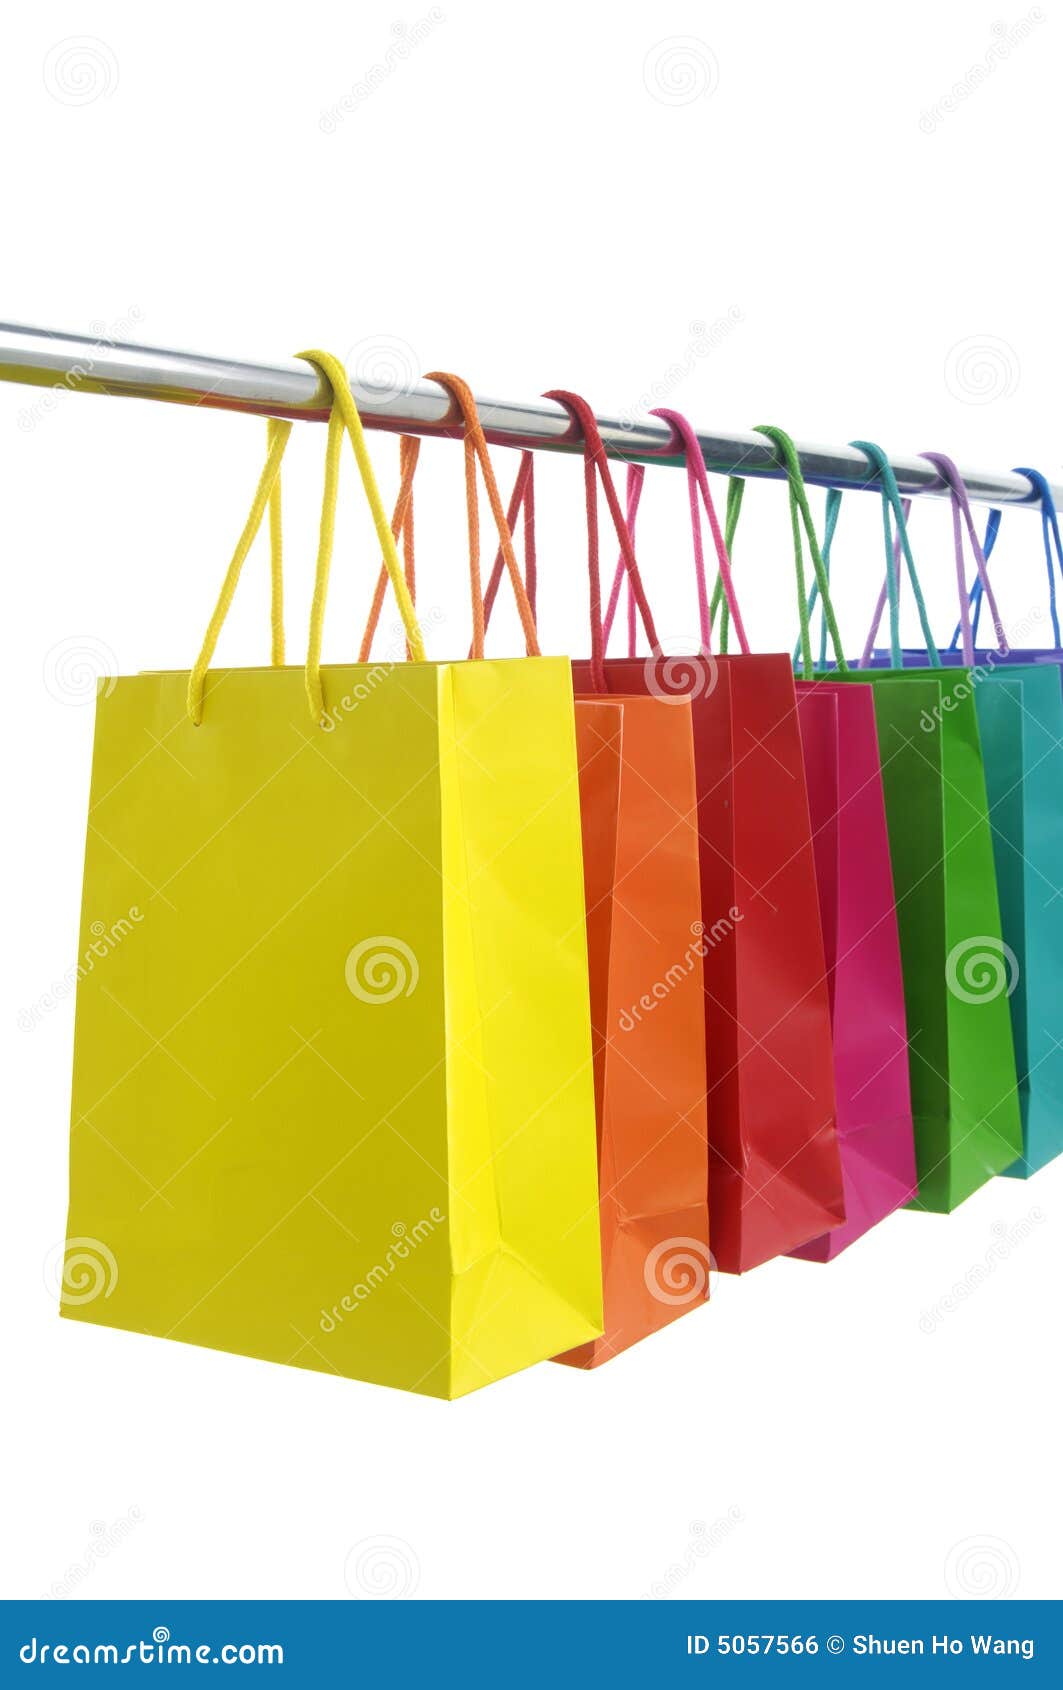 Shopping Bags stock photo. Image of object, rainbow, merchandise - 5057566